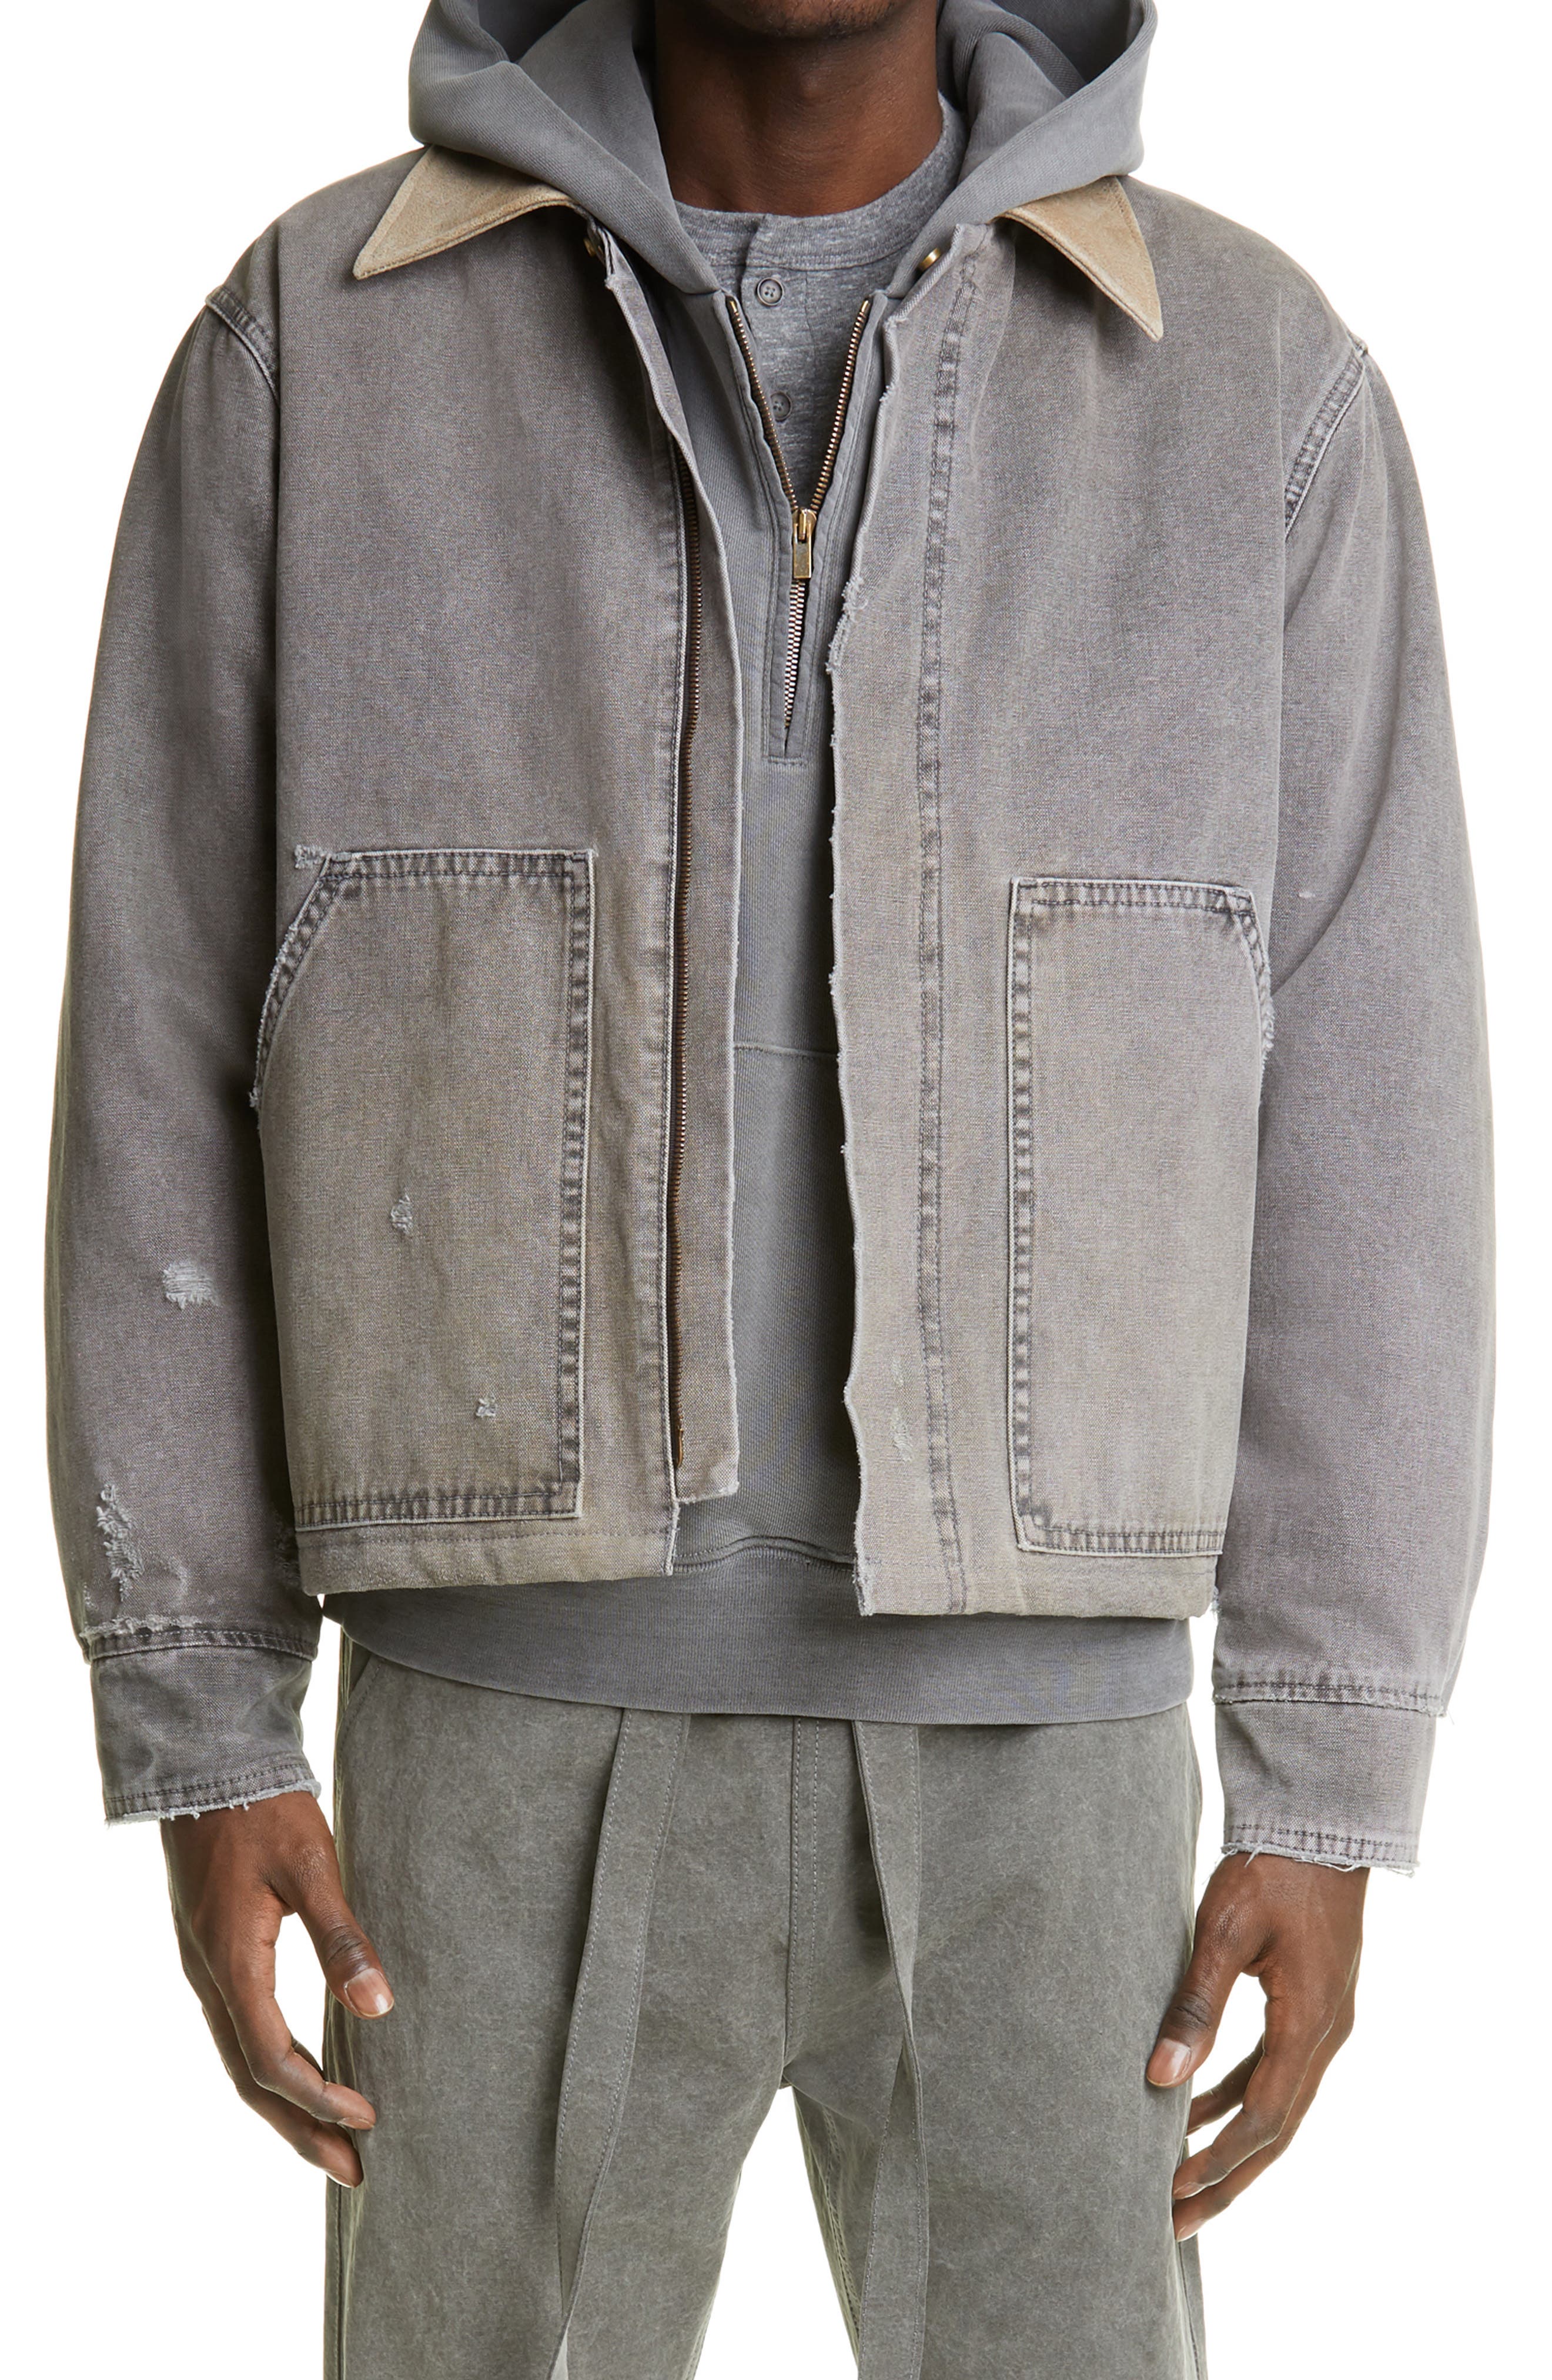 Fear of God Work Jacket in Cement at Nordstrom, Size Medium